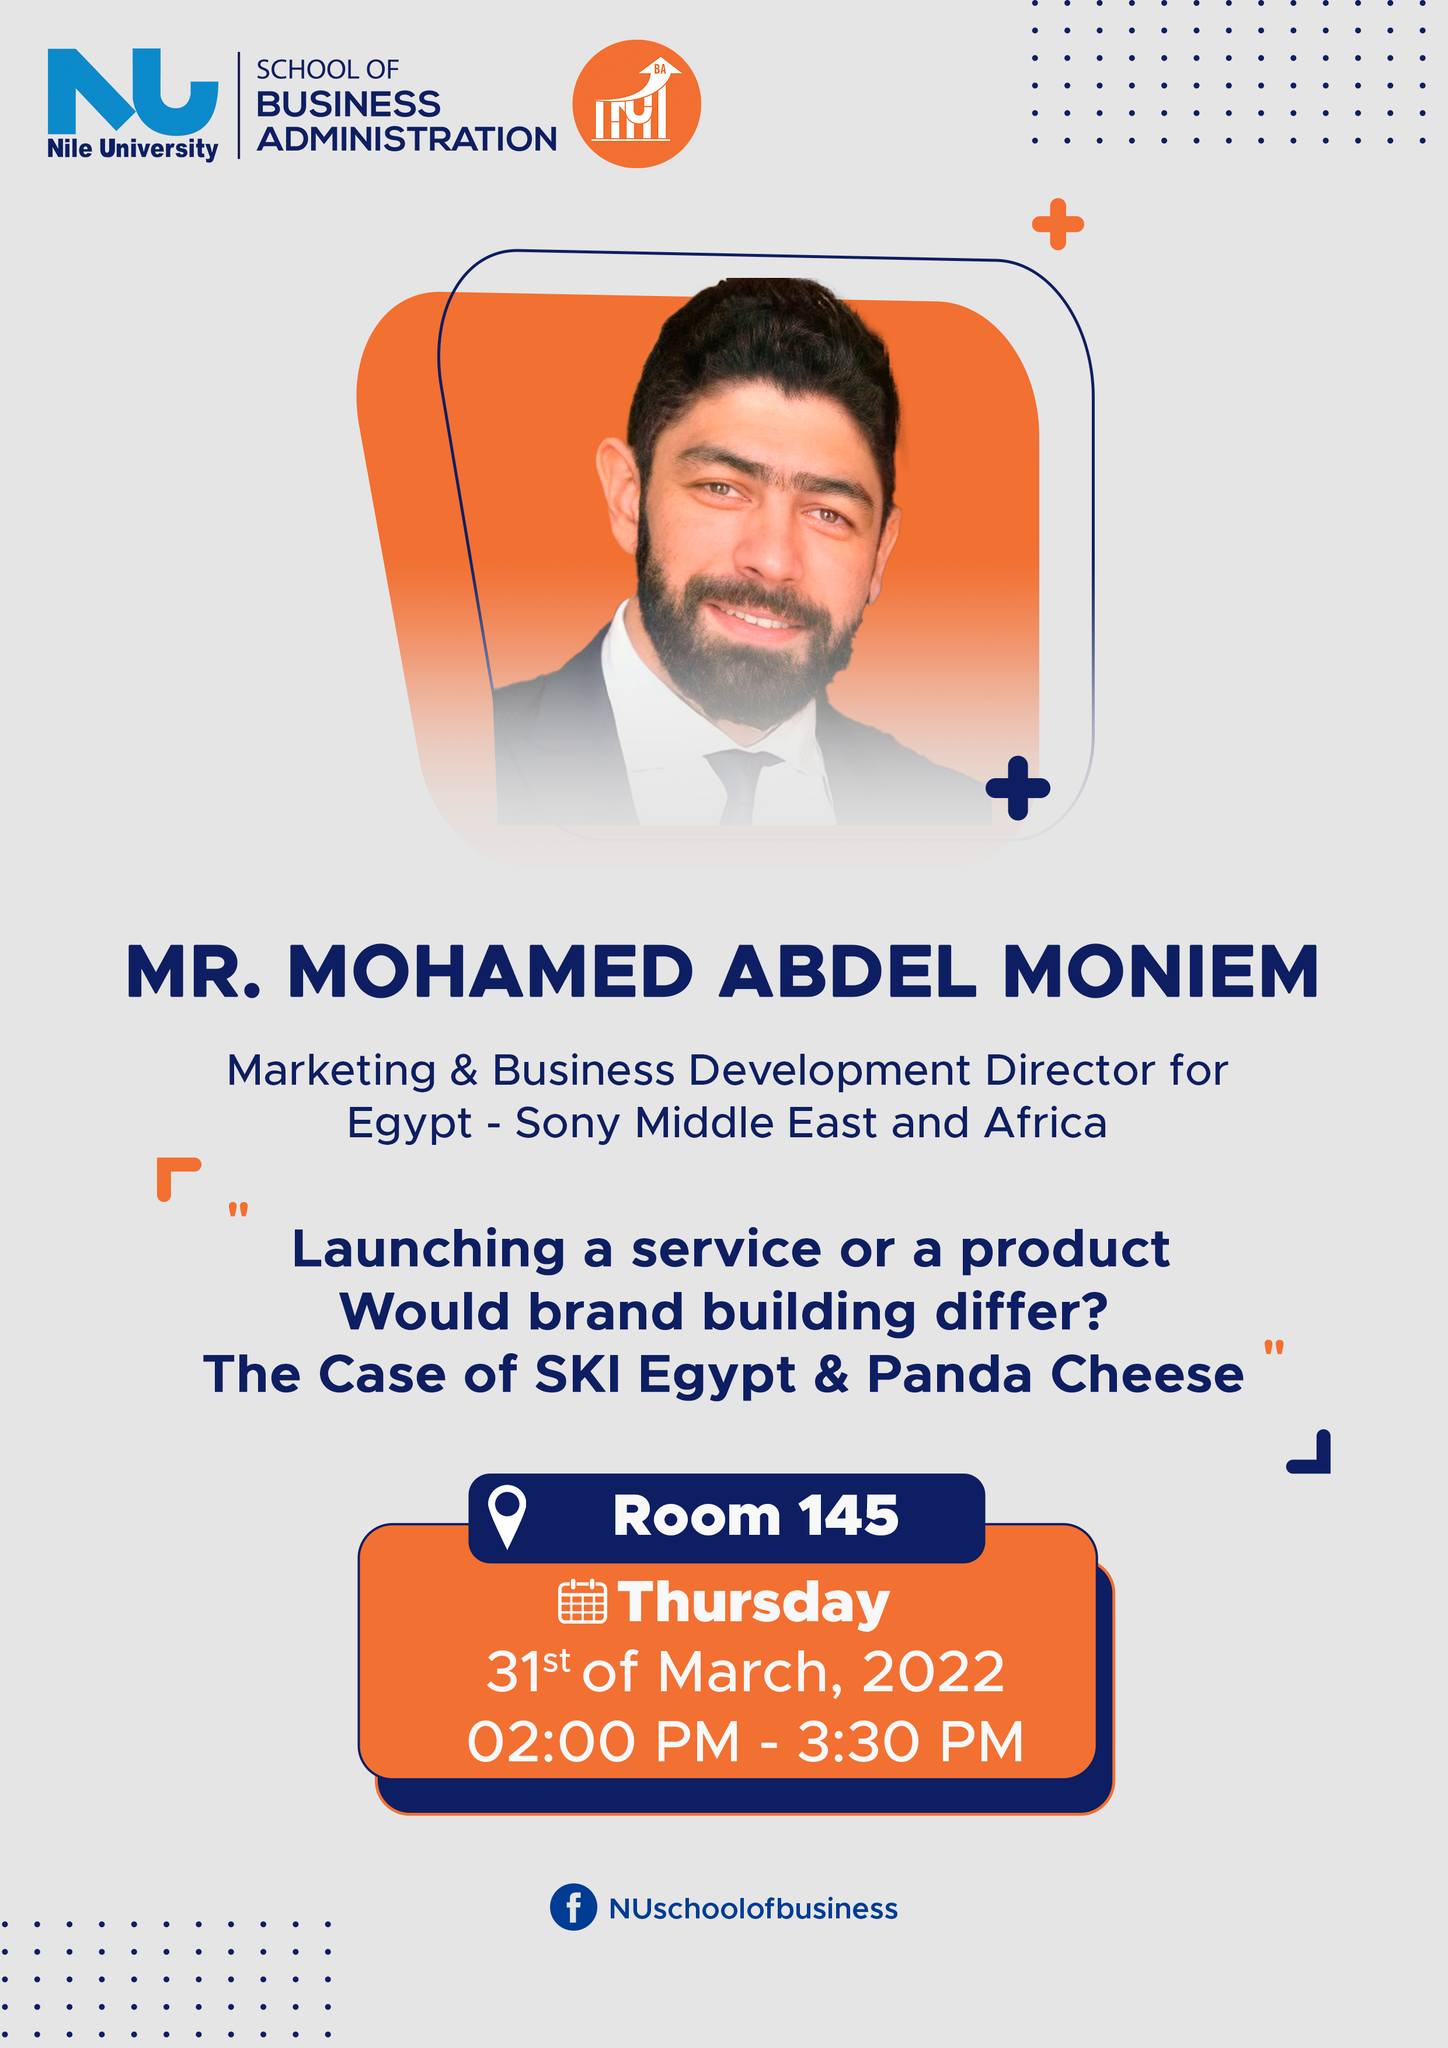 Launching a service or a product, Would brand building differ? The case study of SKI Egypt & Panda cheese